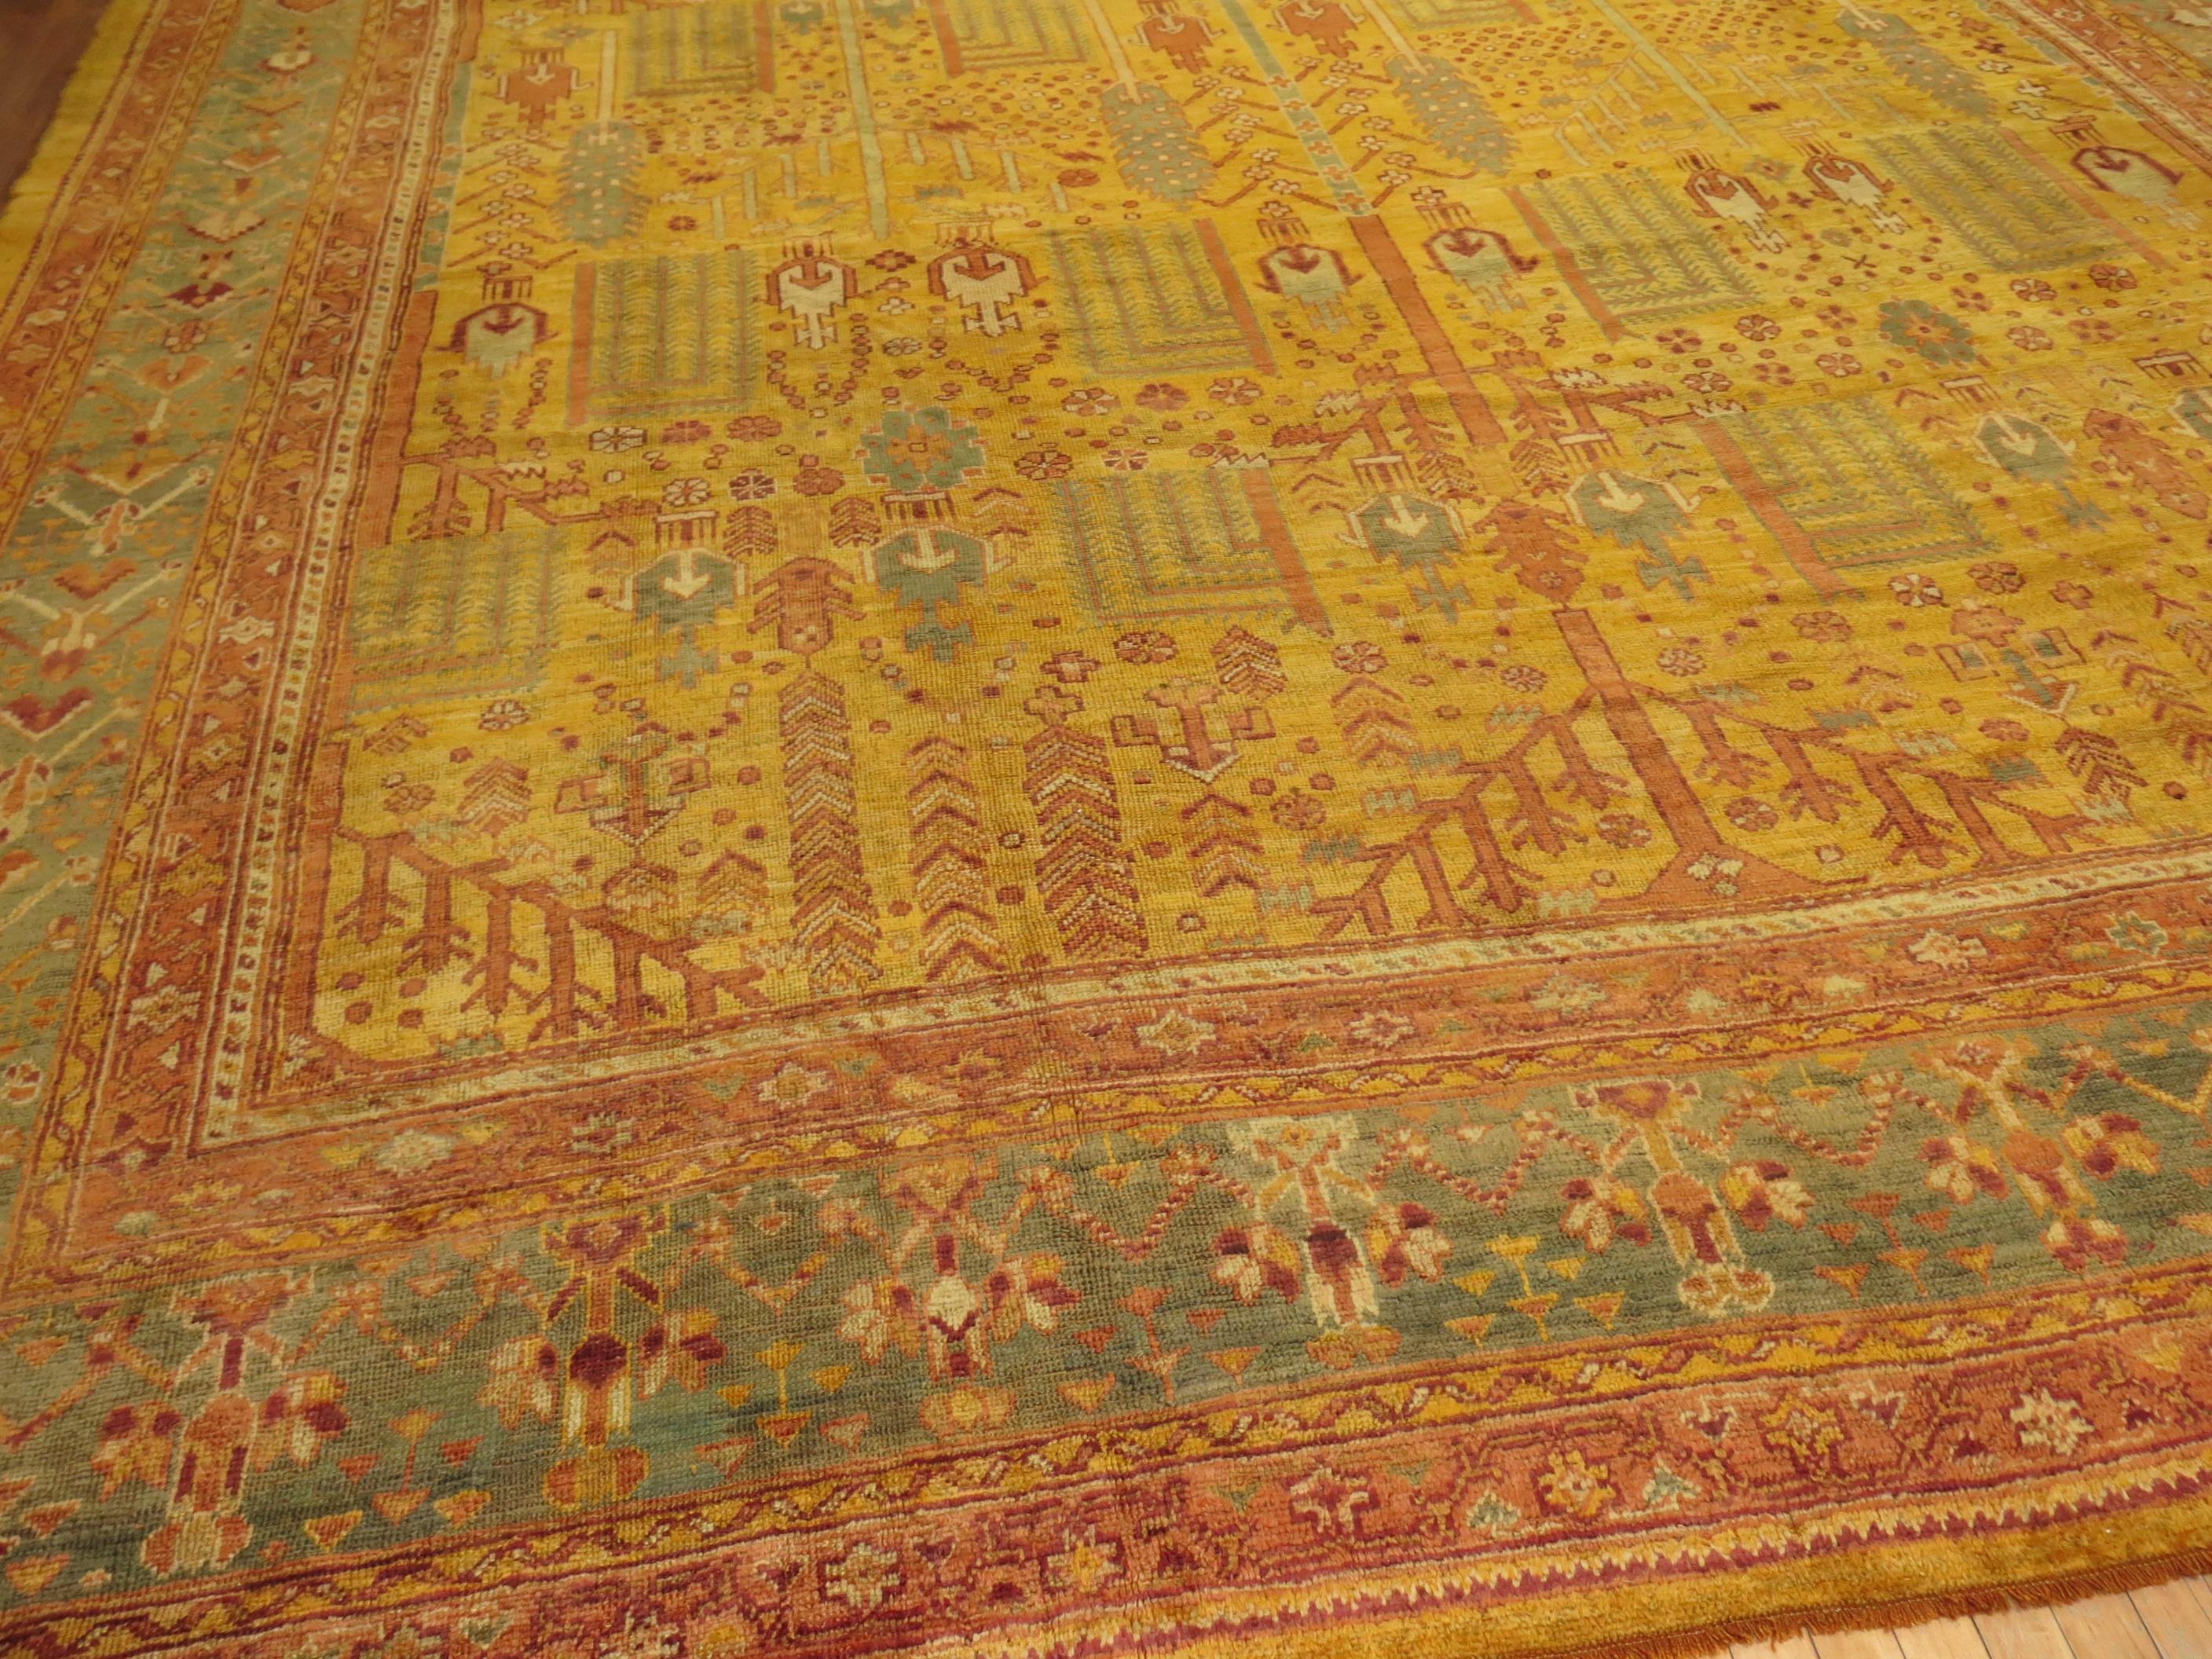 Stunning oversize antique Turkish Oushak rug with a weeping all-over willow tree garden of paradise design with golden saffron dominant field.
With a seldom encountered energetic verdancy, this absolutely charming, folkloric antique oversize Turkish